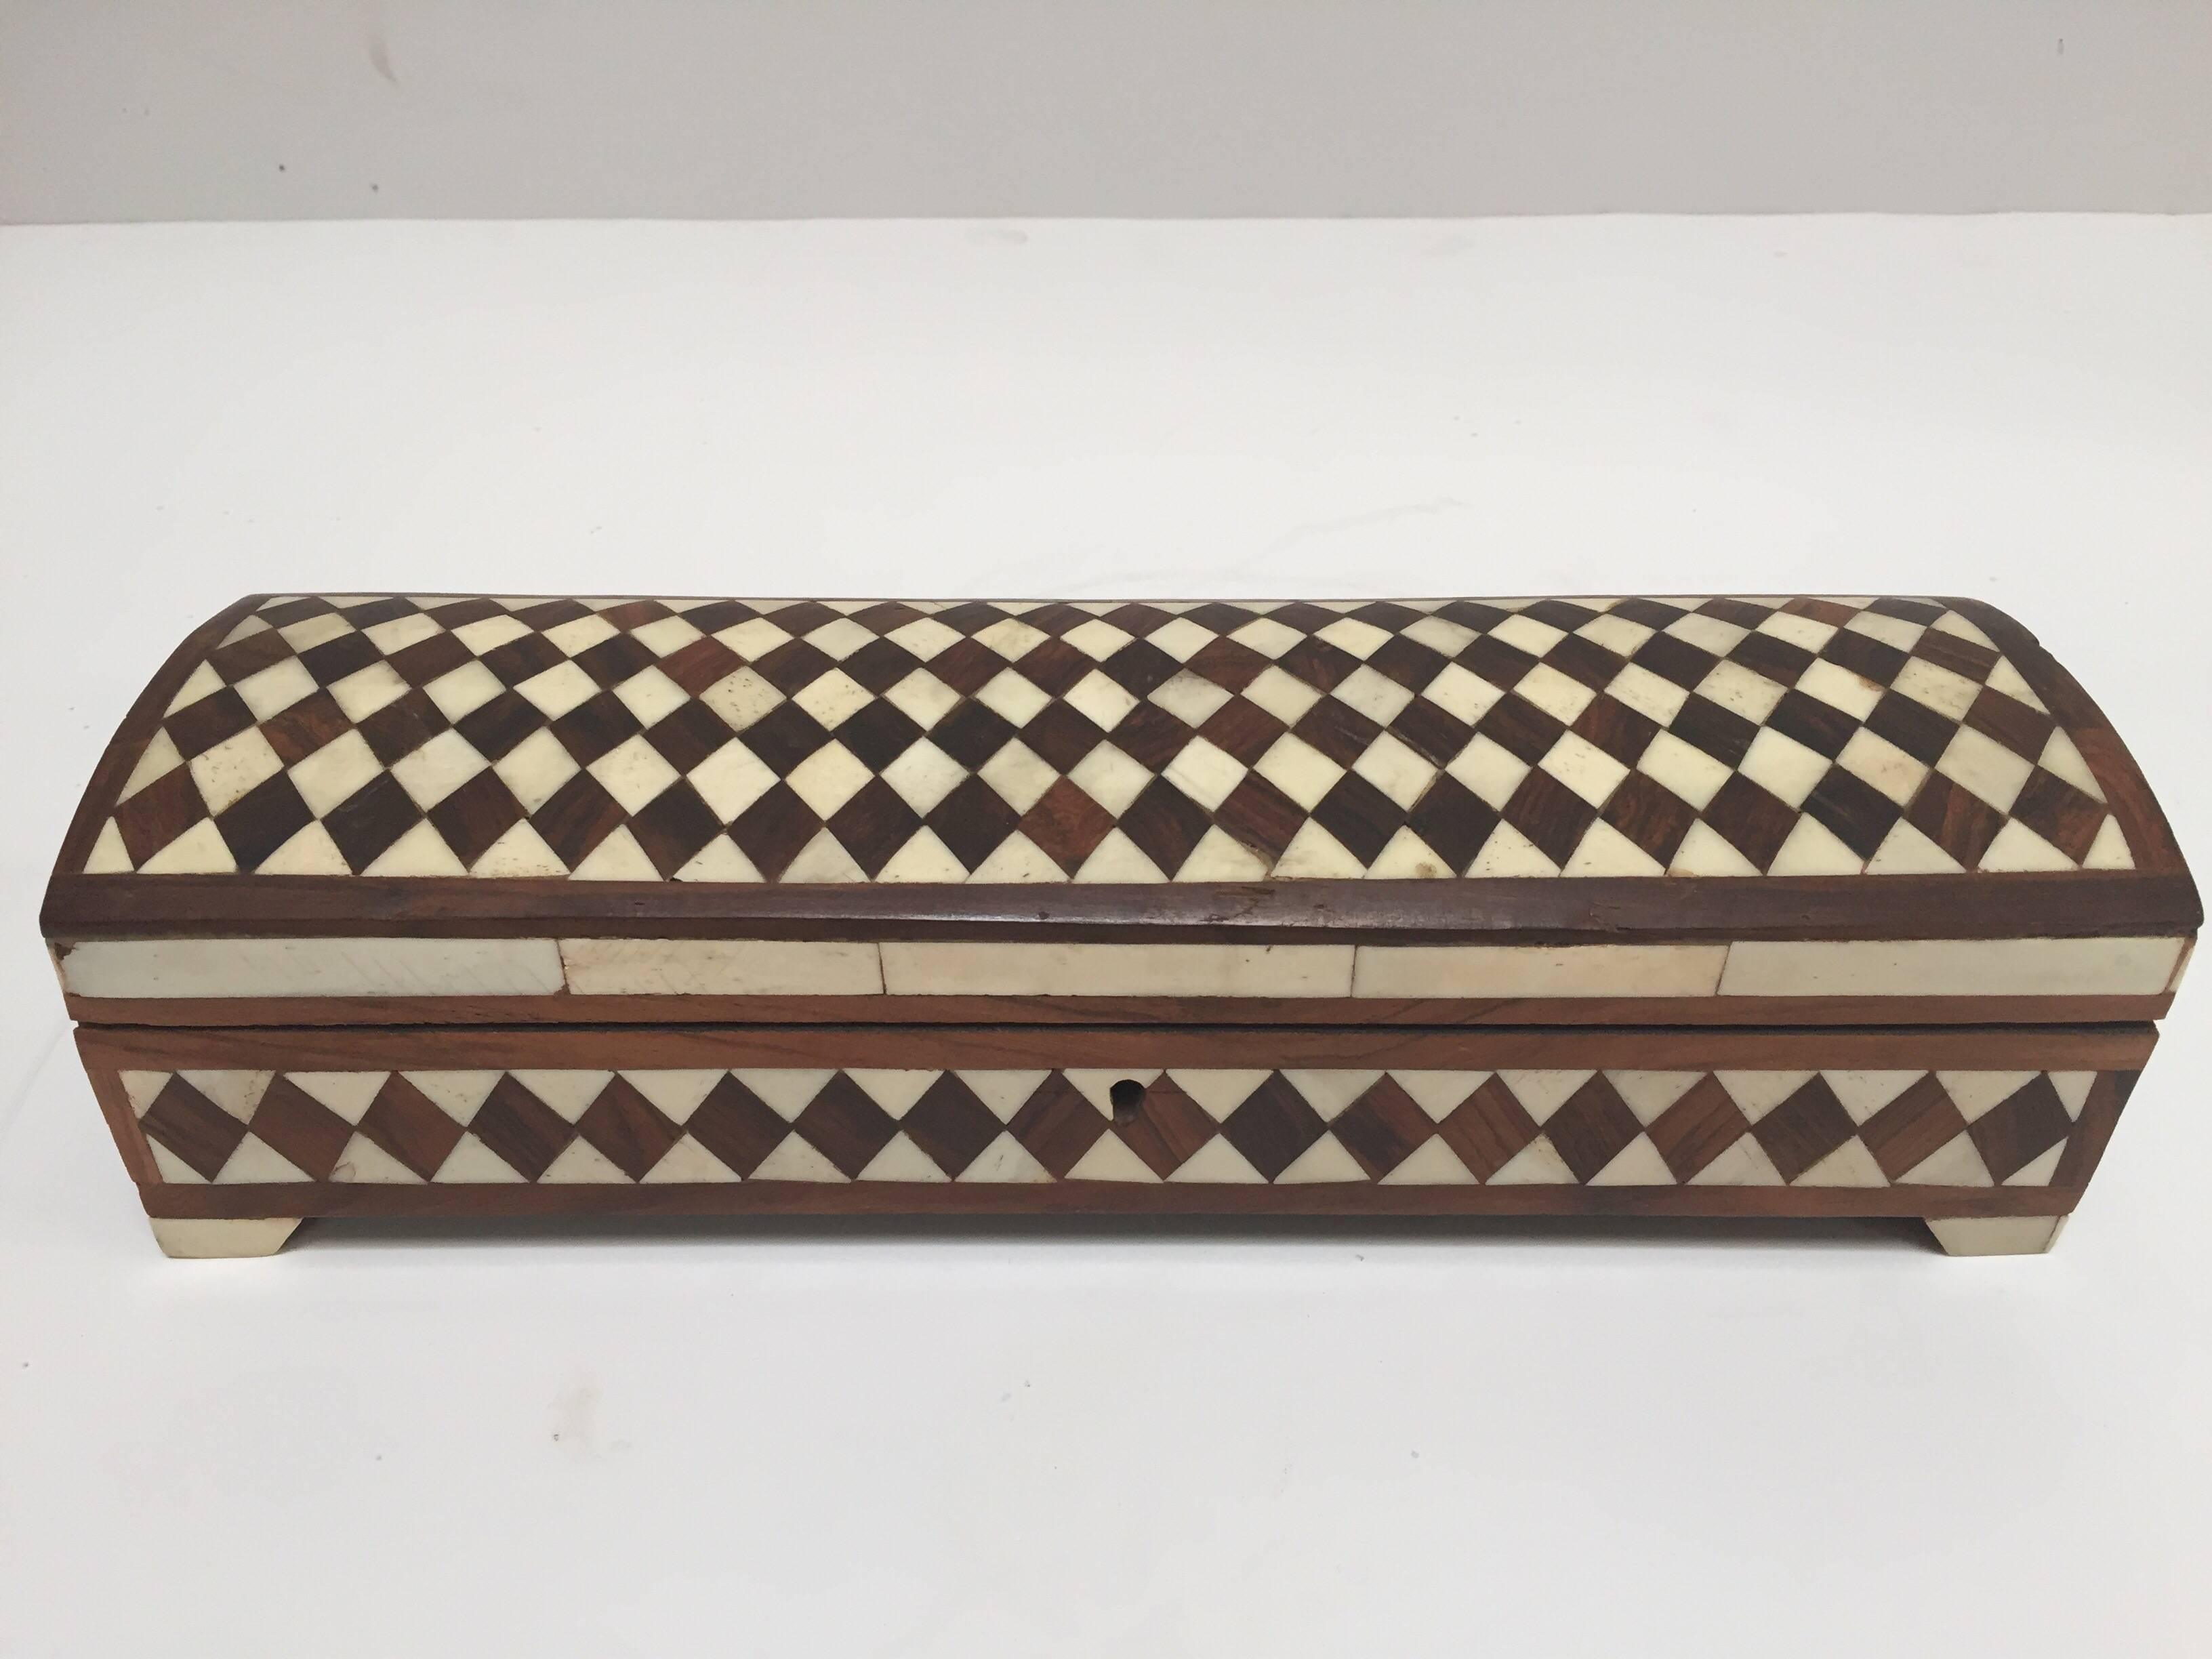 Fabulous Anglo-Indian decorative box inlaid.
Made in Vizagapatam, situated on the south east coast of India, near Madras.
Great decorative inlaid pen box or jewelry box.
Inside dimensions: 12